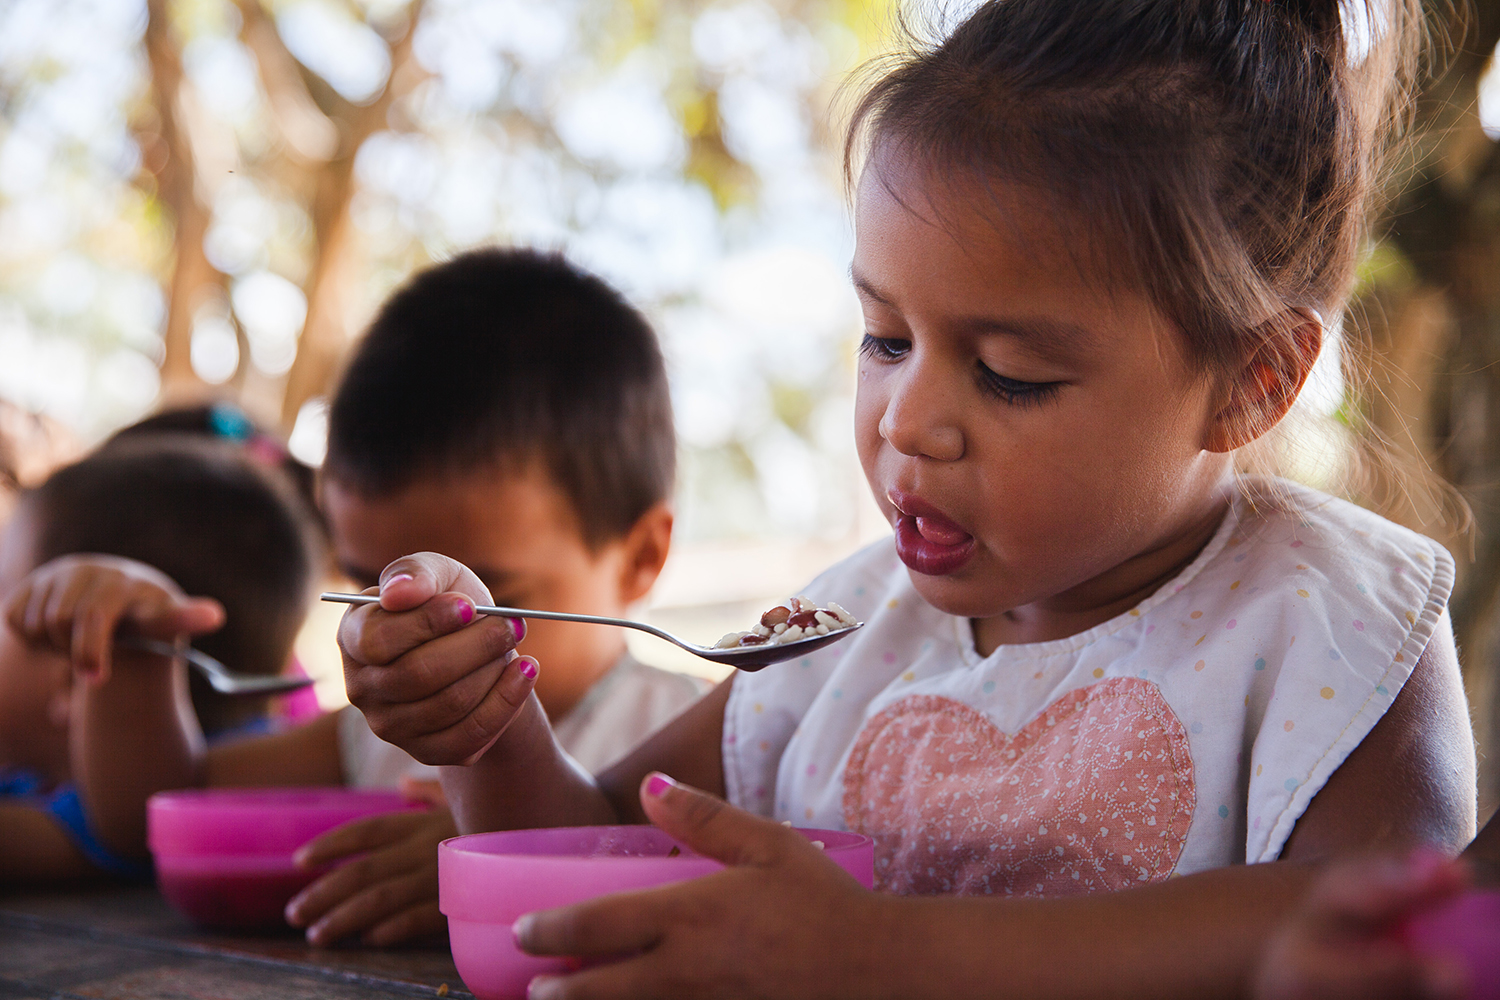 Child Poverty in Latin America - Little girl eating a bowl of food